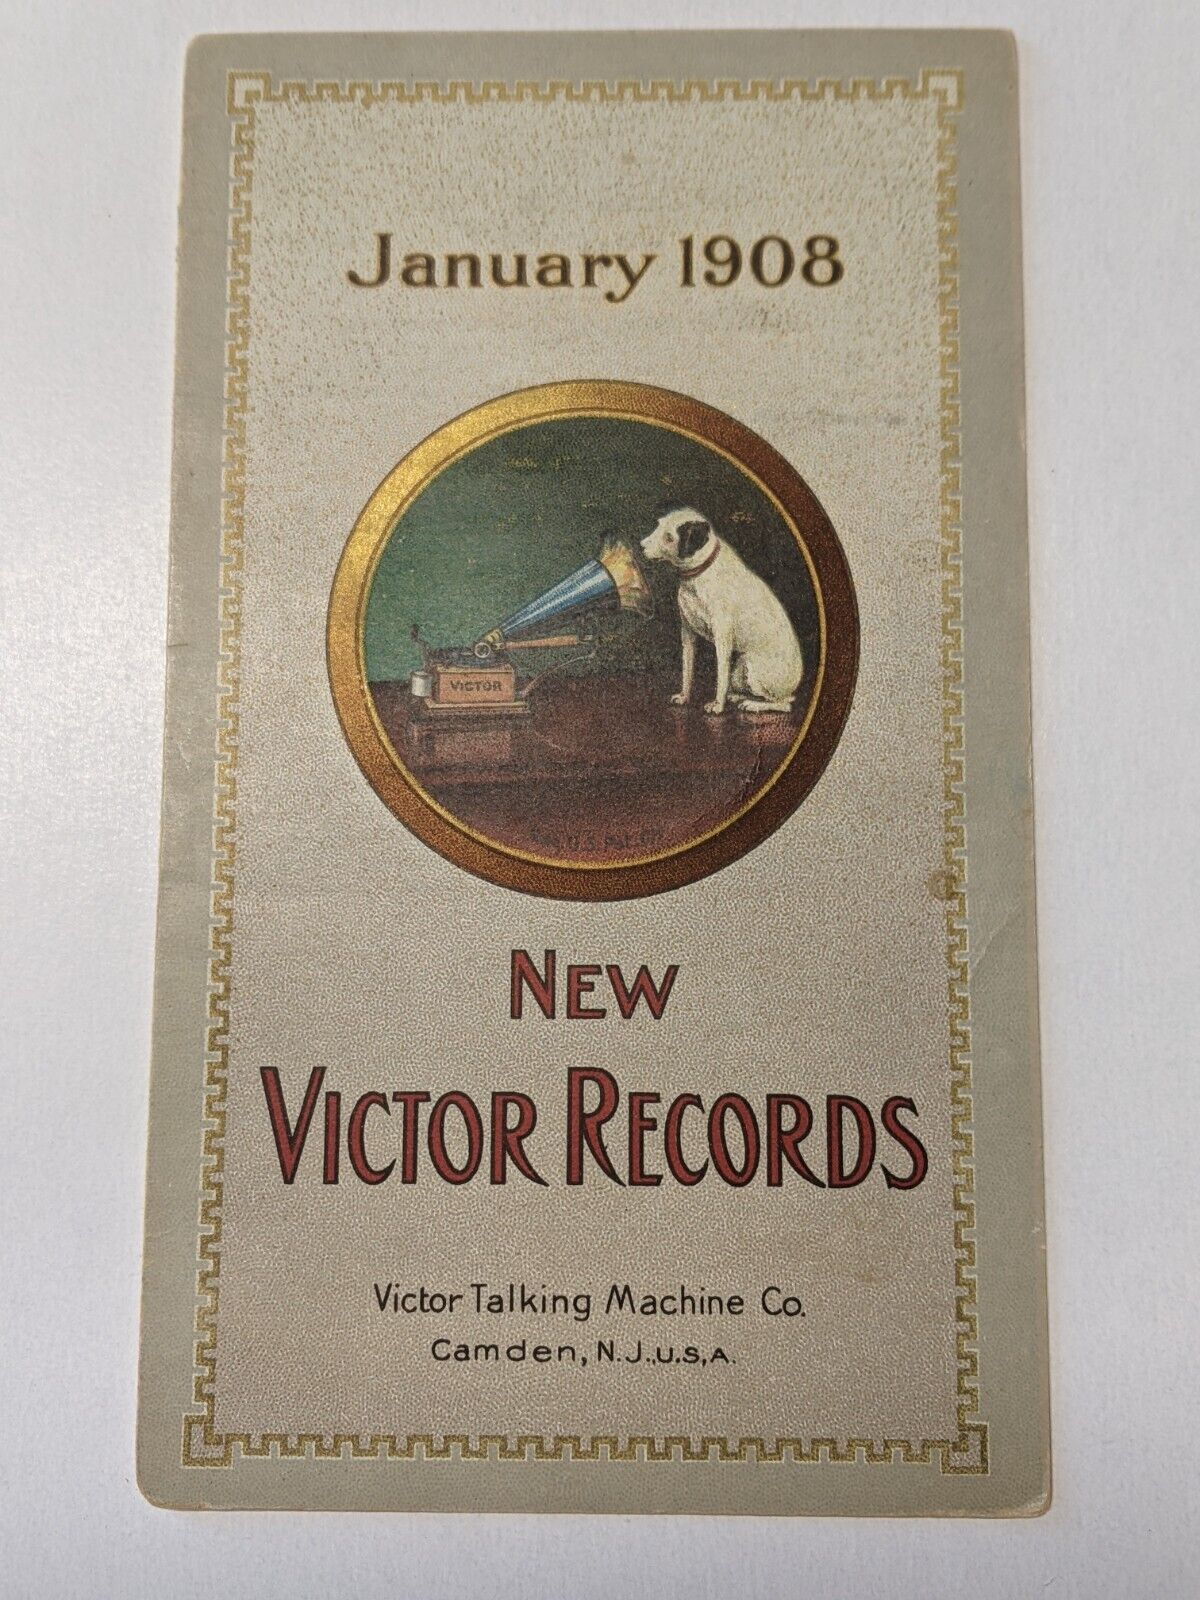 Antique Victor Talking Machine Records January 1908 Catalog Pamphlet Caruso